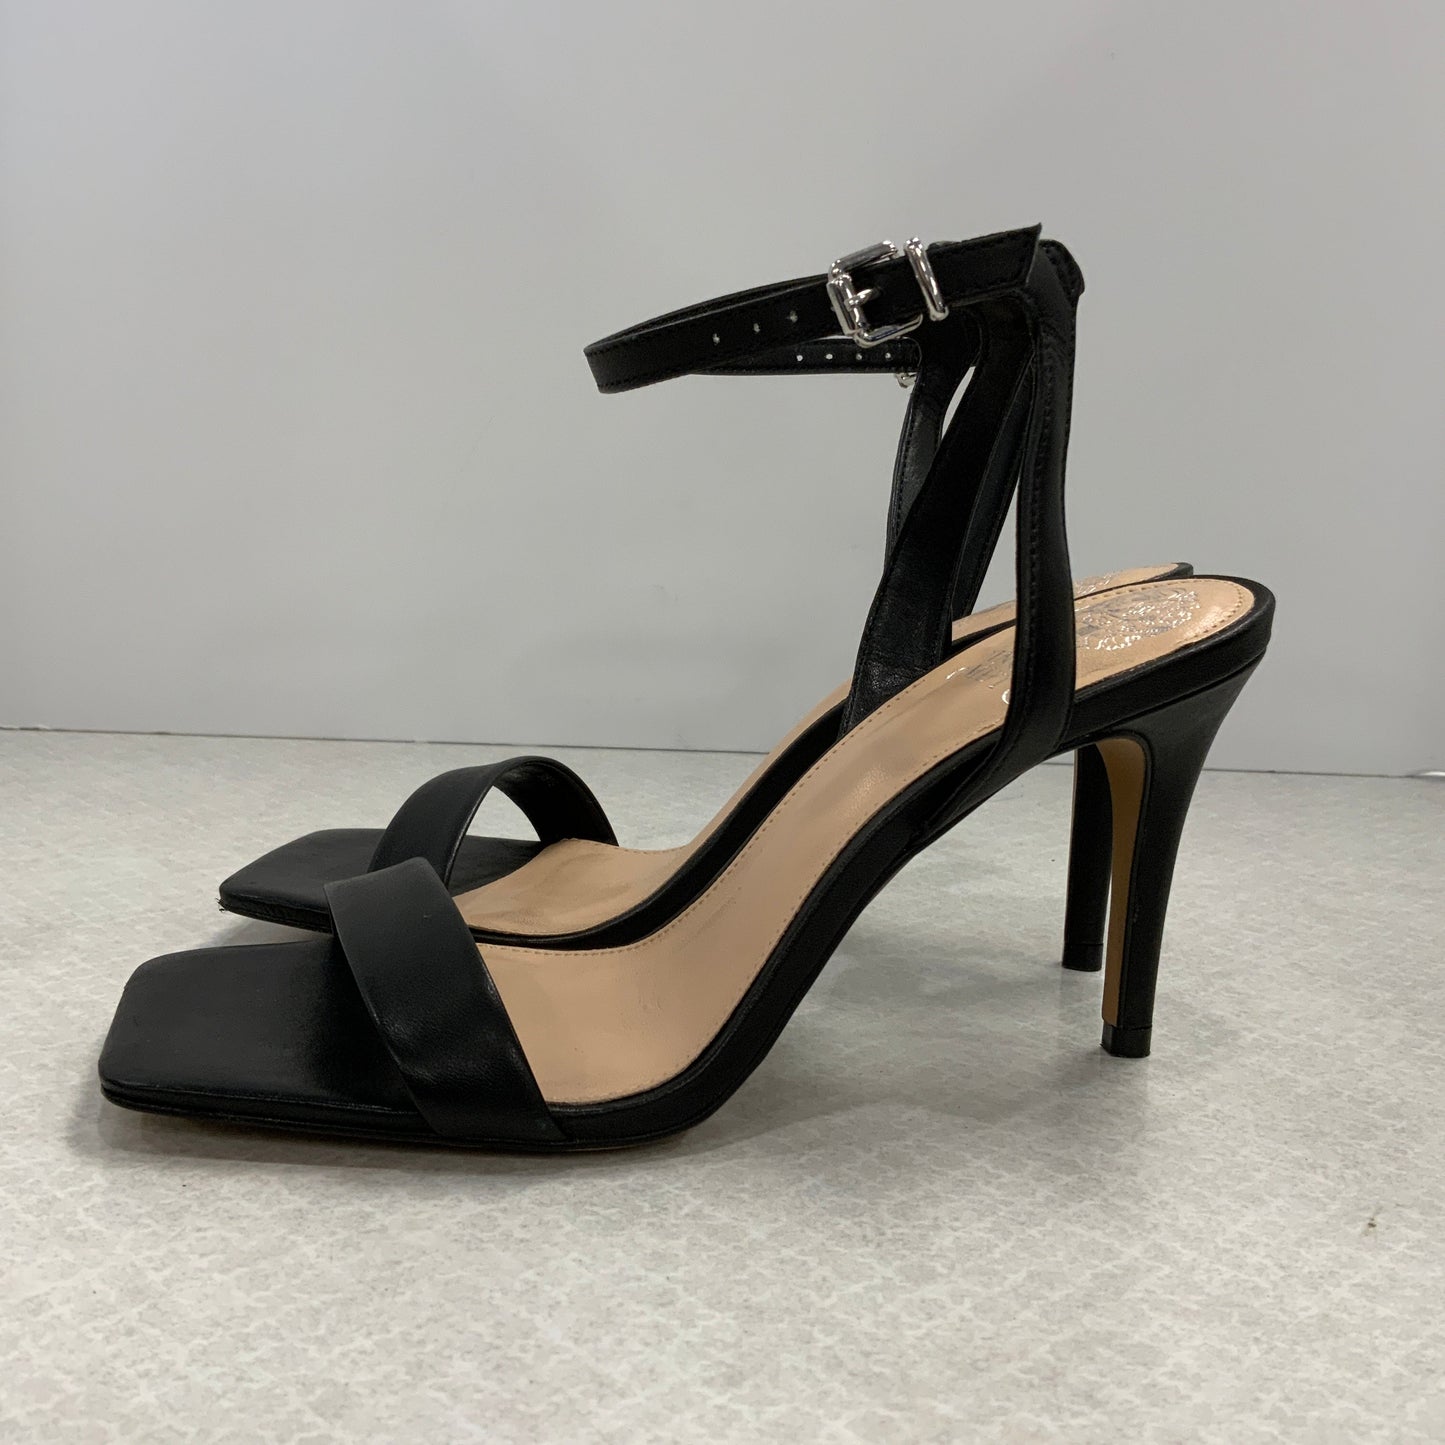 Sandals Heels Stiletto By Vince Camuto  Size: 8